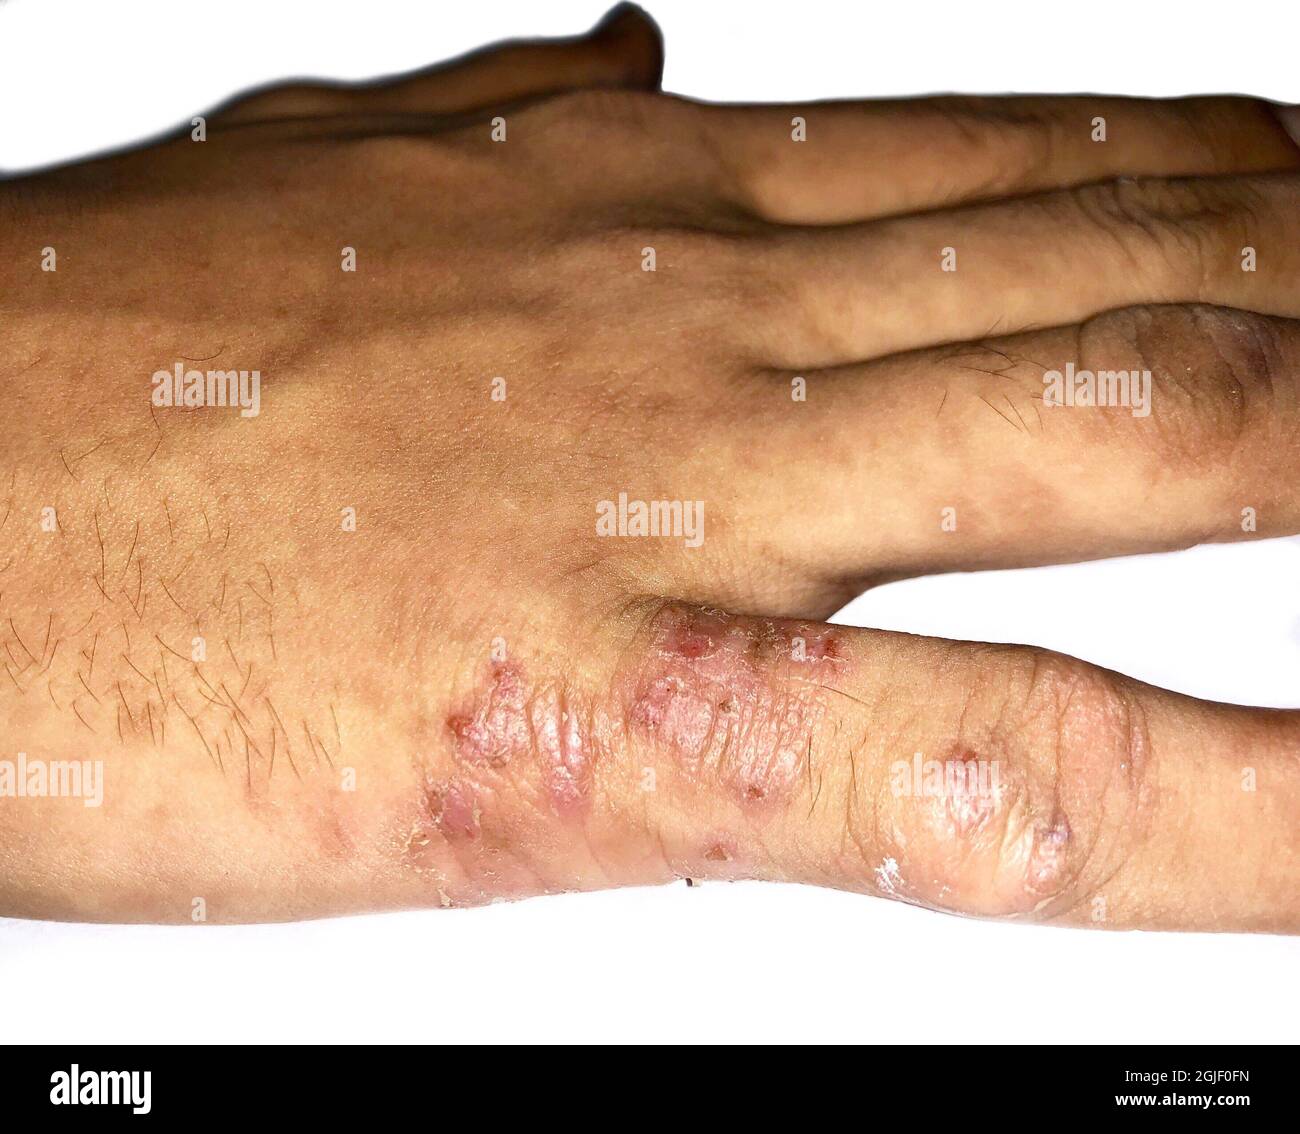 Scabies Infestation with secondary or superimposed bacterial infection in hand of Southeast Asian, Burmese child. A contagious skin condition caused b Stock Photo